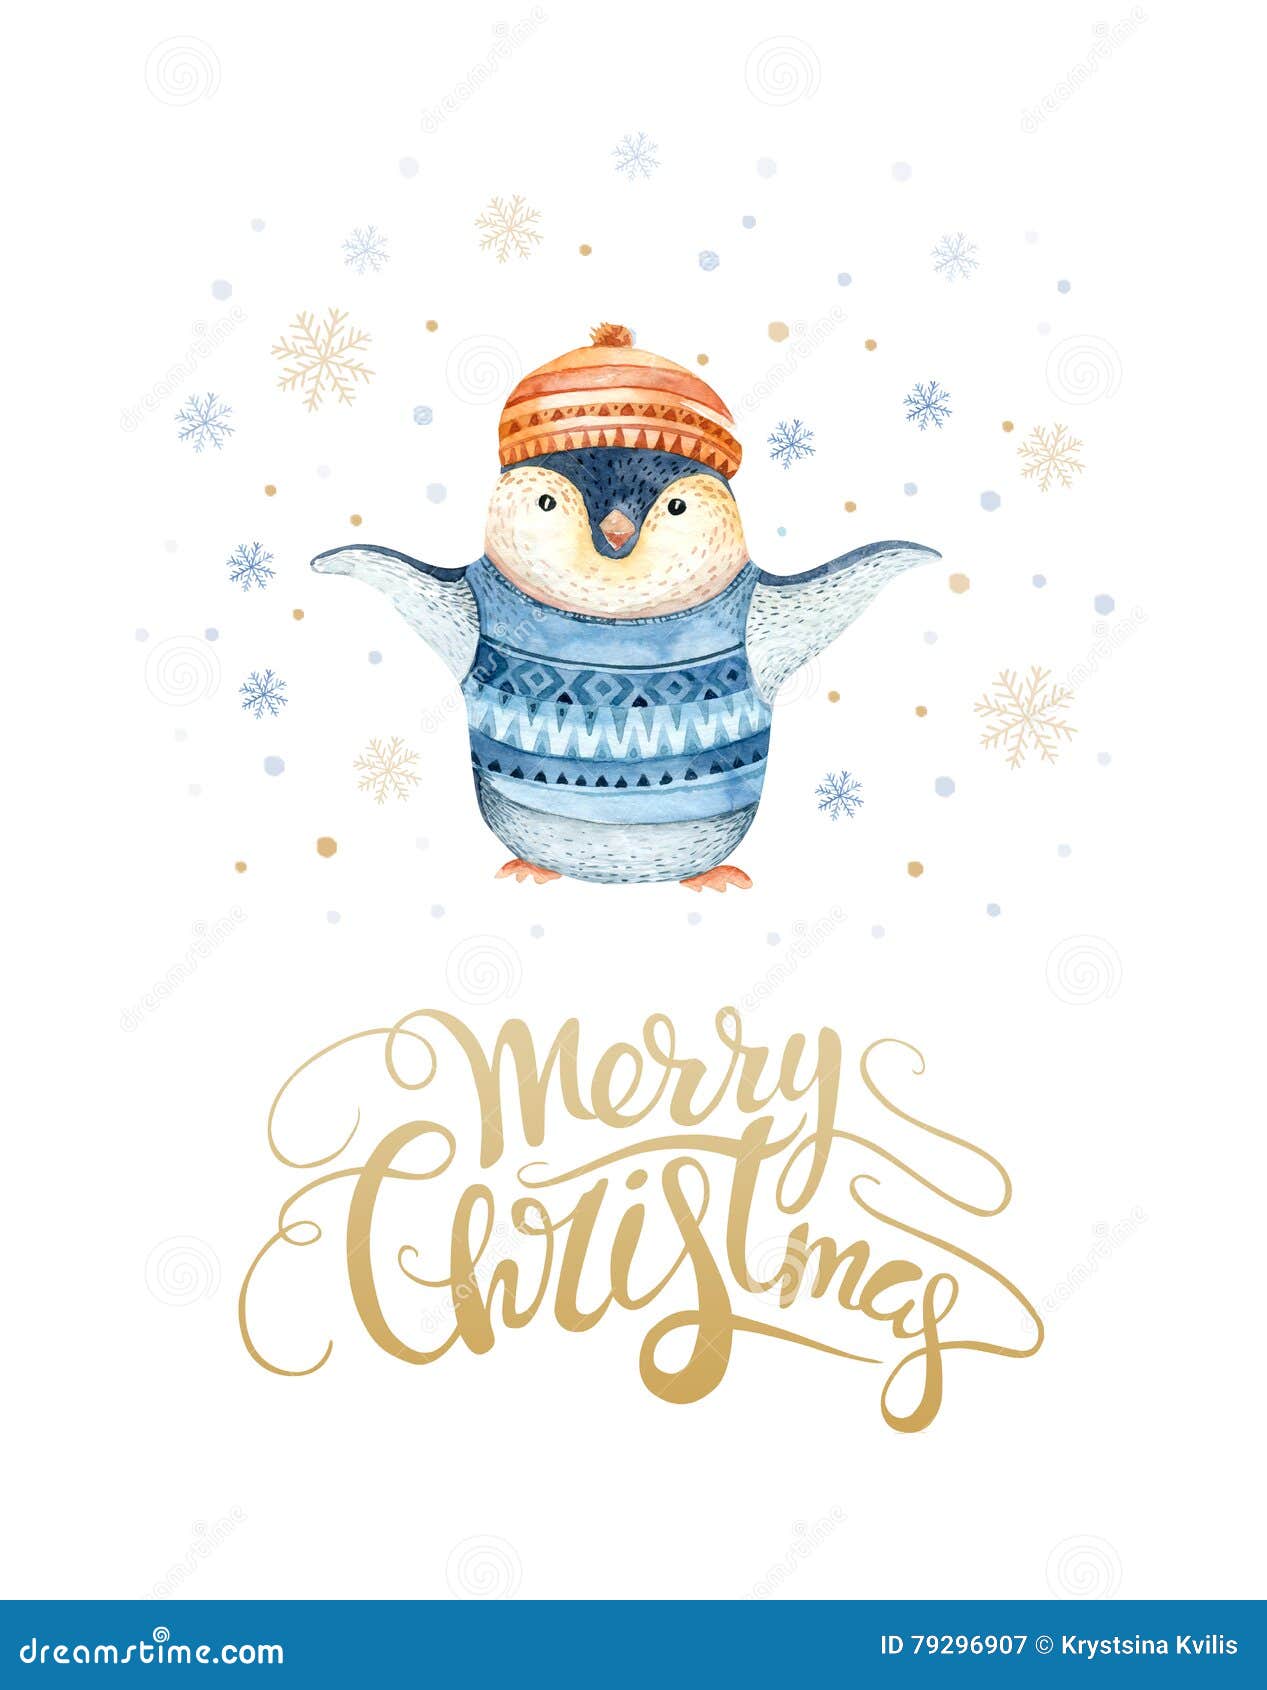 Merry Christmas Lettering with Watercolour Fun Pinguin. Stock ...